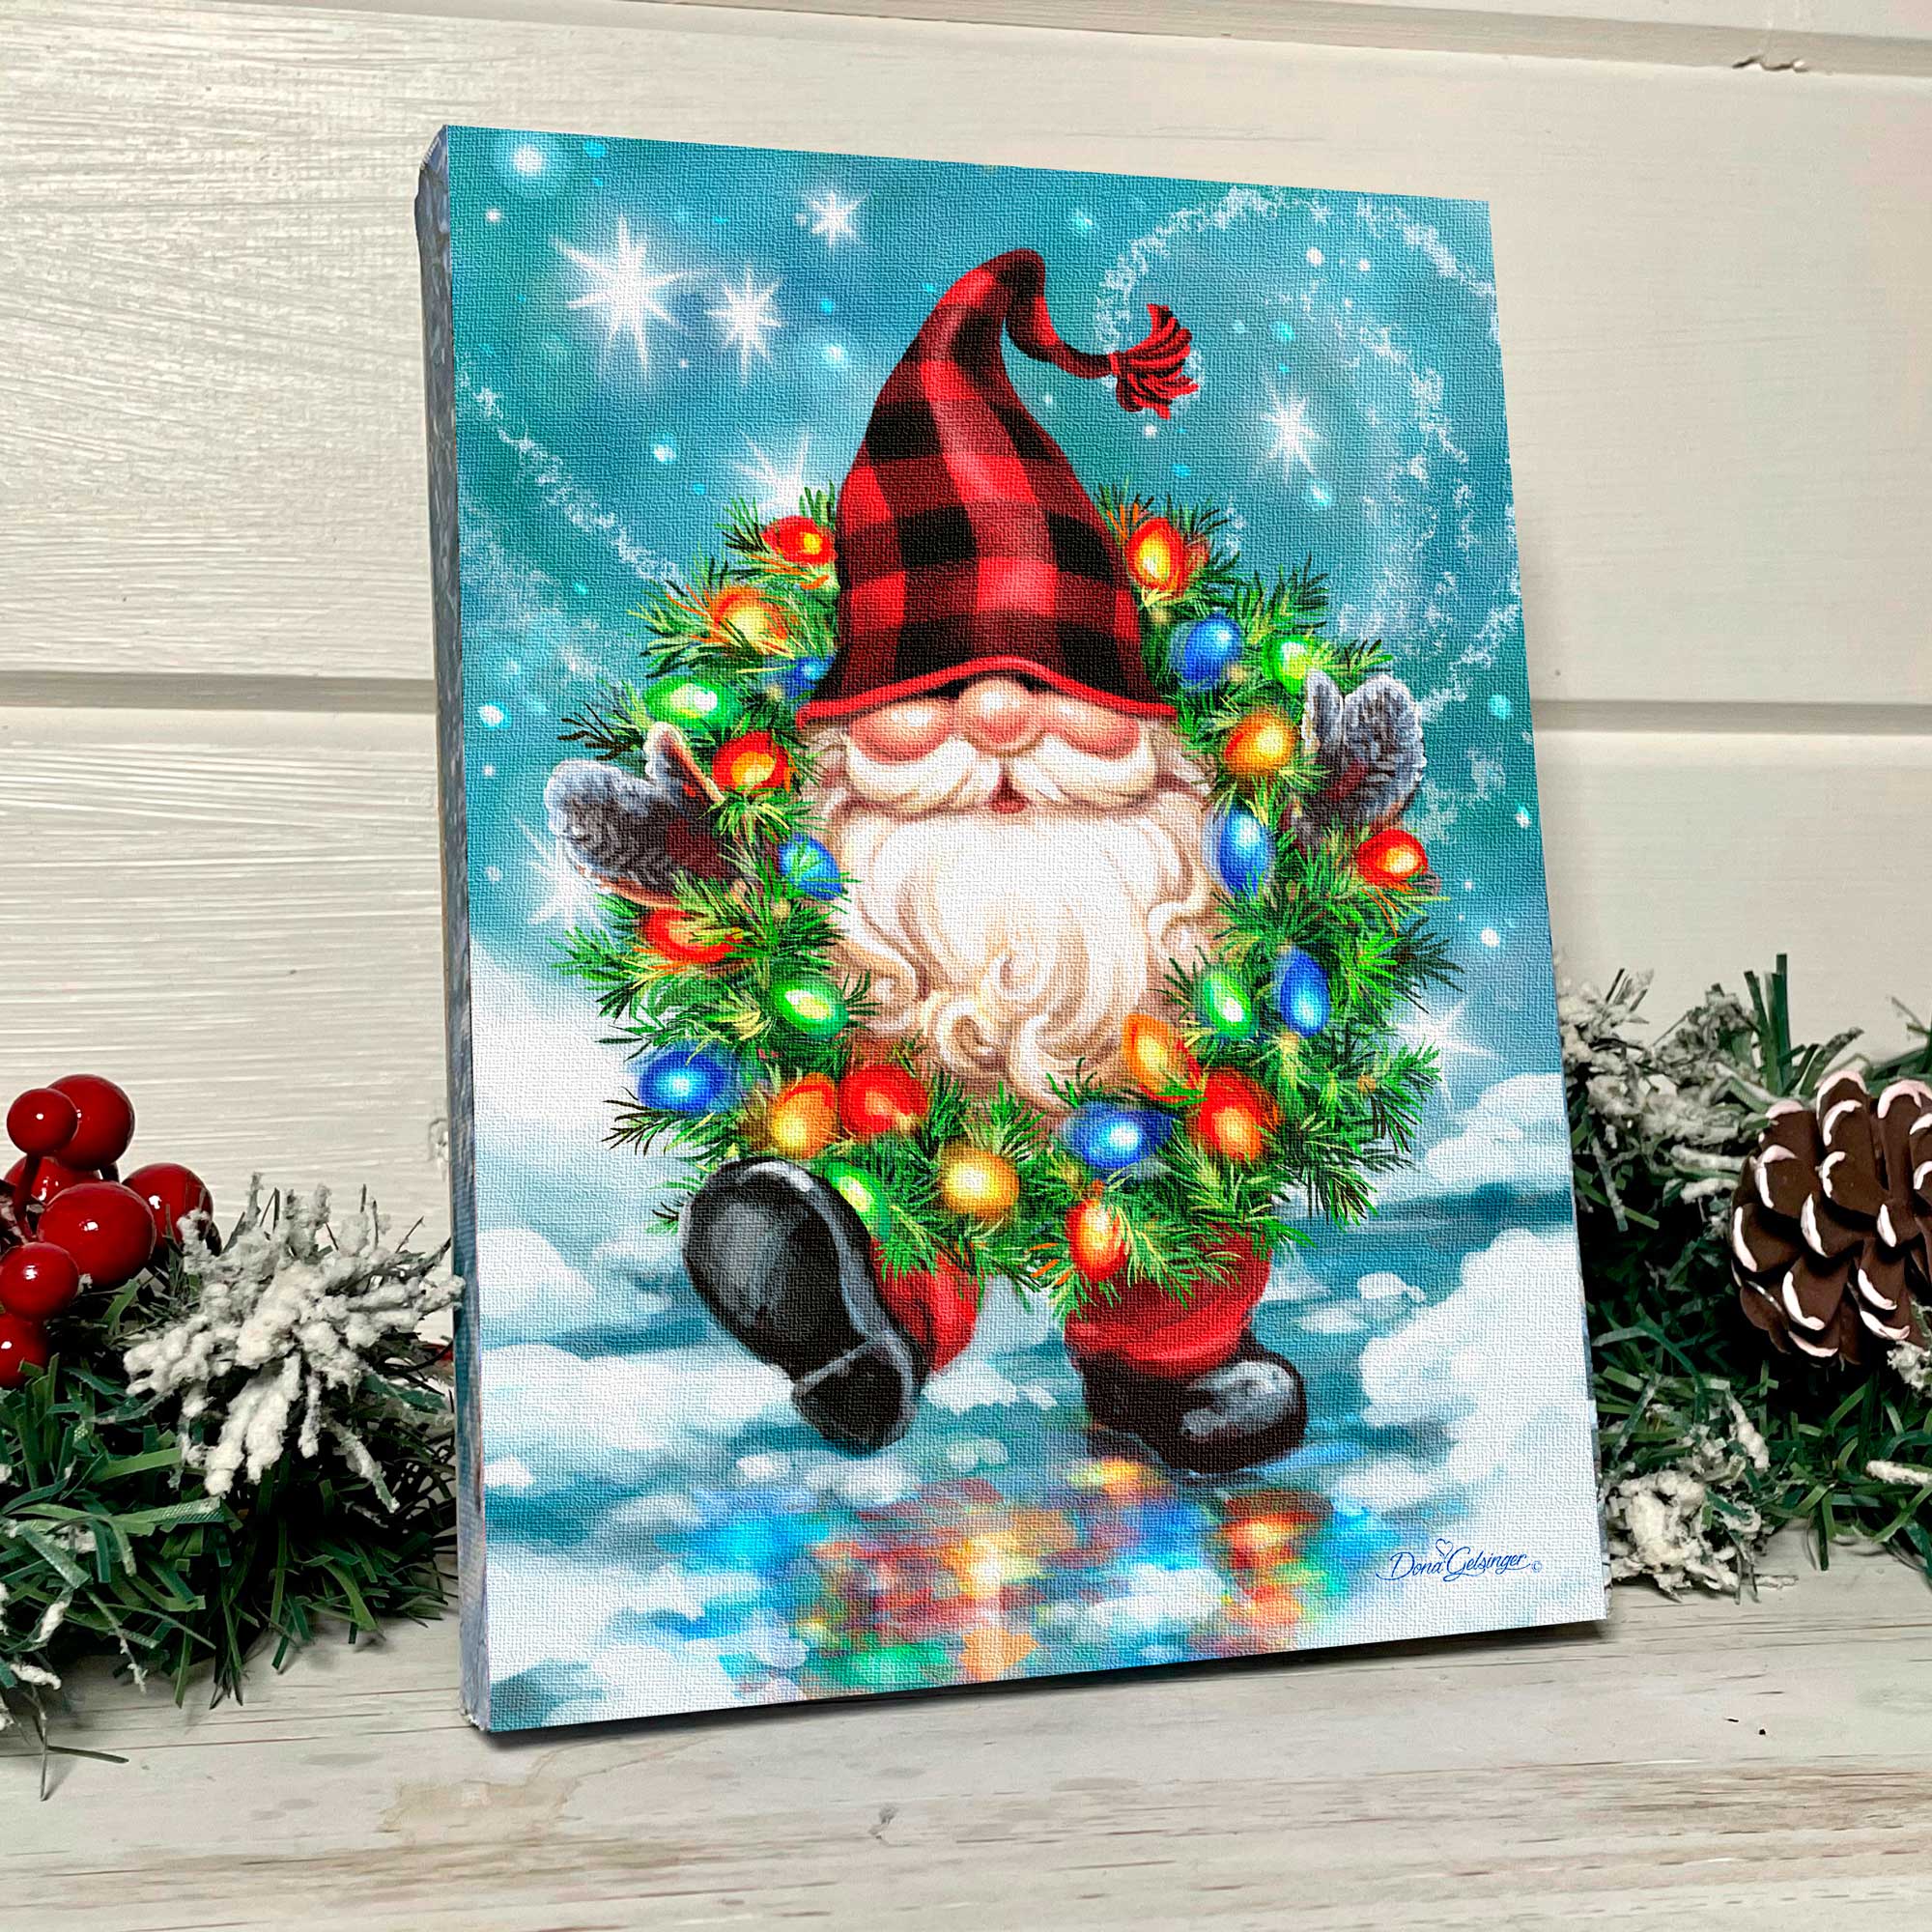 This charming 8x6 canvas showcases a jolly gnome, decked out in a festive plaid beanie and boasting a long, full white beard that exudes warmth and merriment.  But that's not all - this delightful gnome is also adorned with a colorful wreath, wrapped snugly around his neck and illuminated by twinkling LED lights.